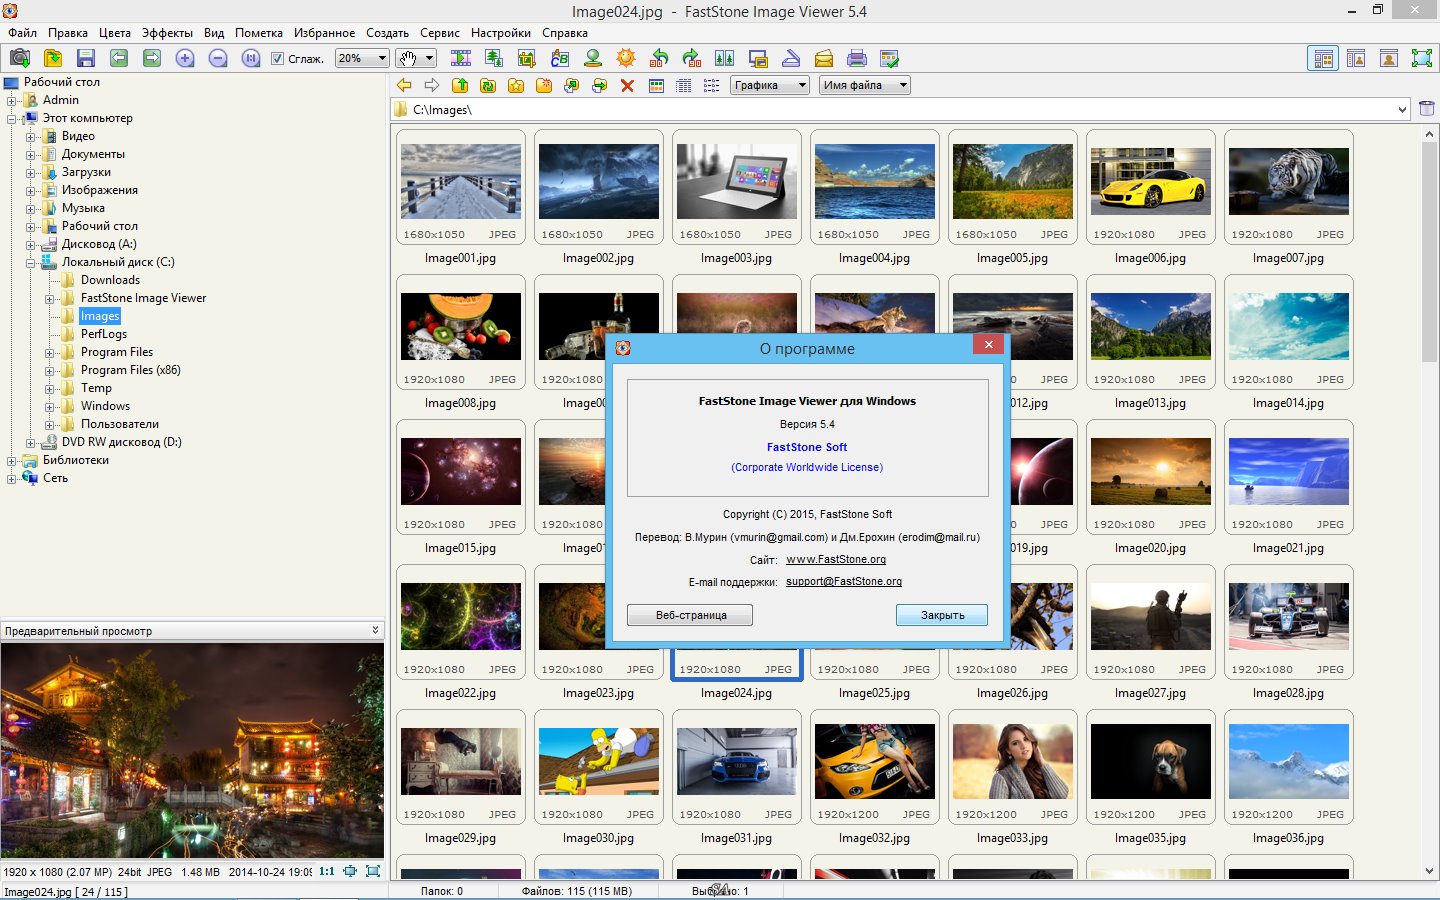 FASTSTONE image viewer 5